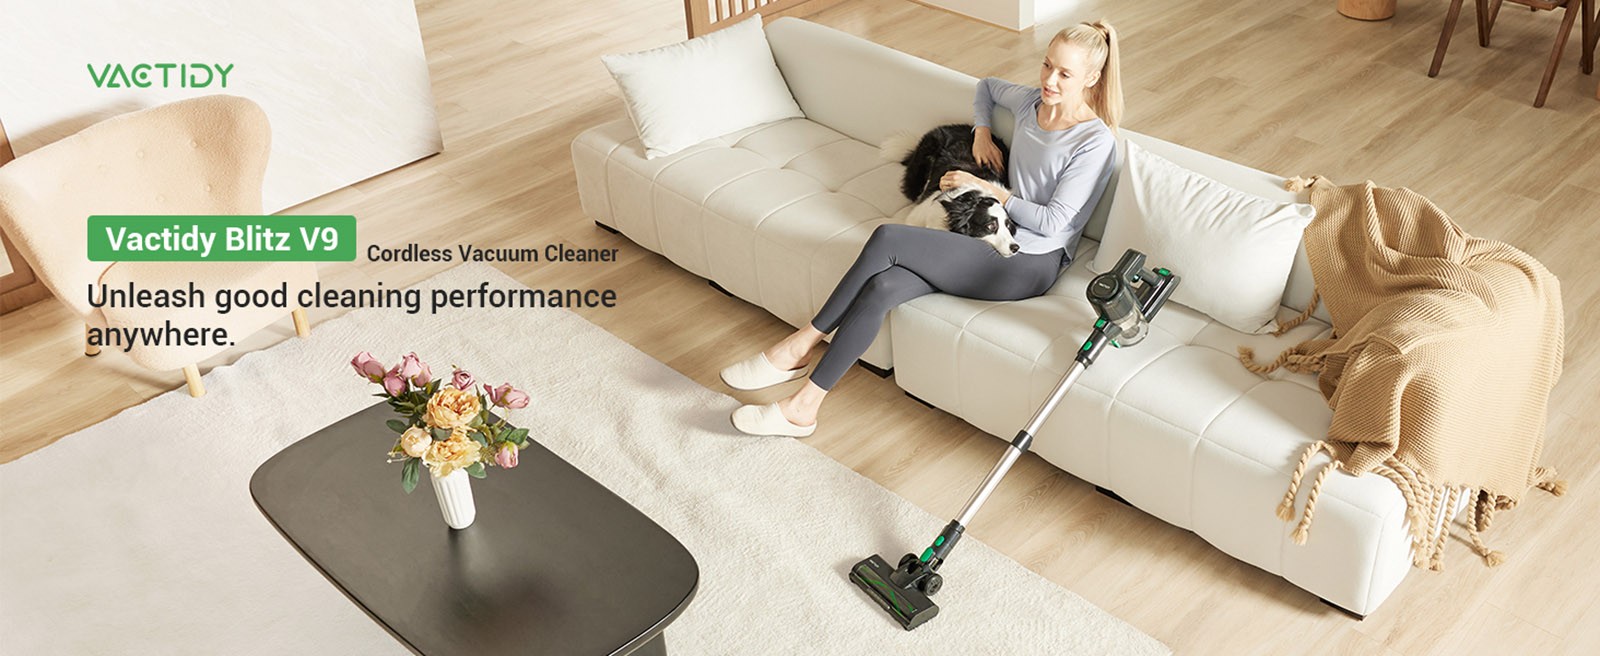 Vactidy V9 Cordless Vacuum Cleaner, 25KPa Suction, 1L Dustbin, 5 Layers Filtration System, One-Button Emptying, LED Touch Panel, Bright LED Headlights, Up to 45min Runtime